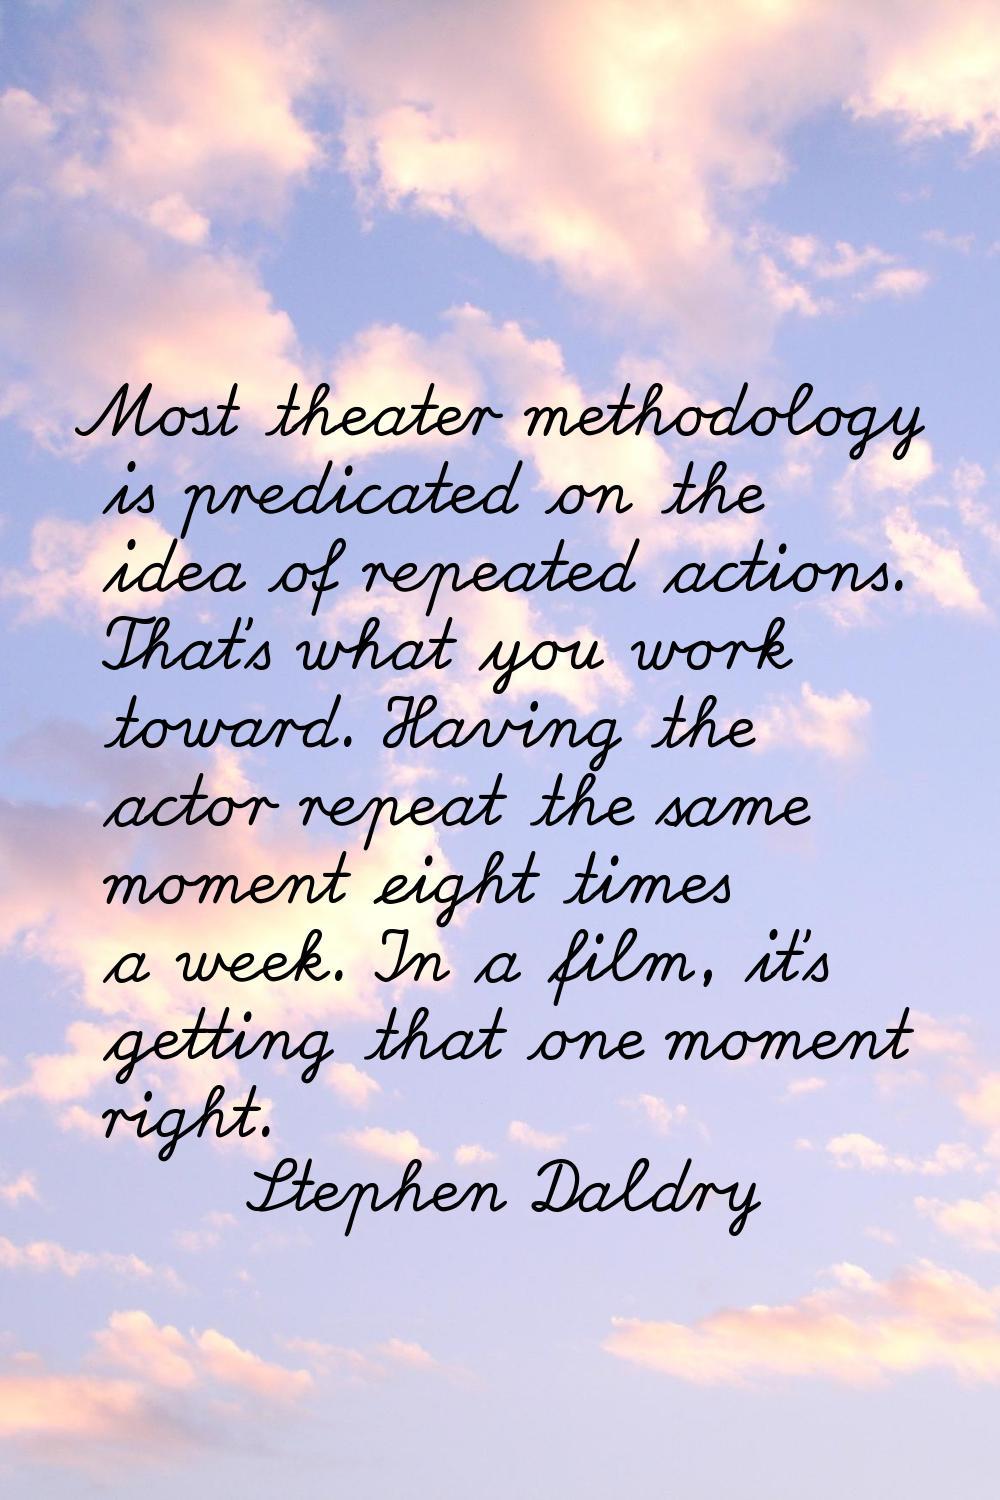 Most theater methodology is predicated on the idea of repeated actions. That's what you work toward